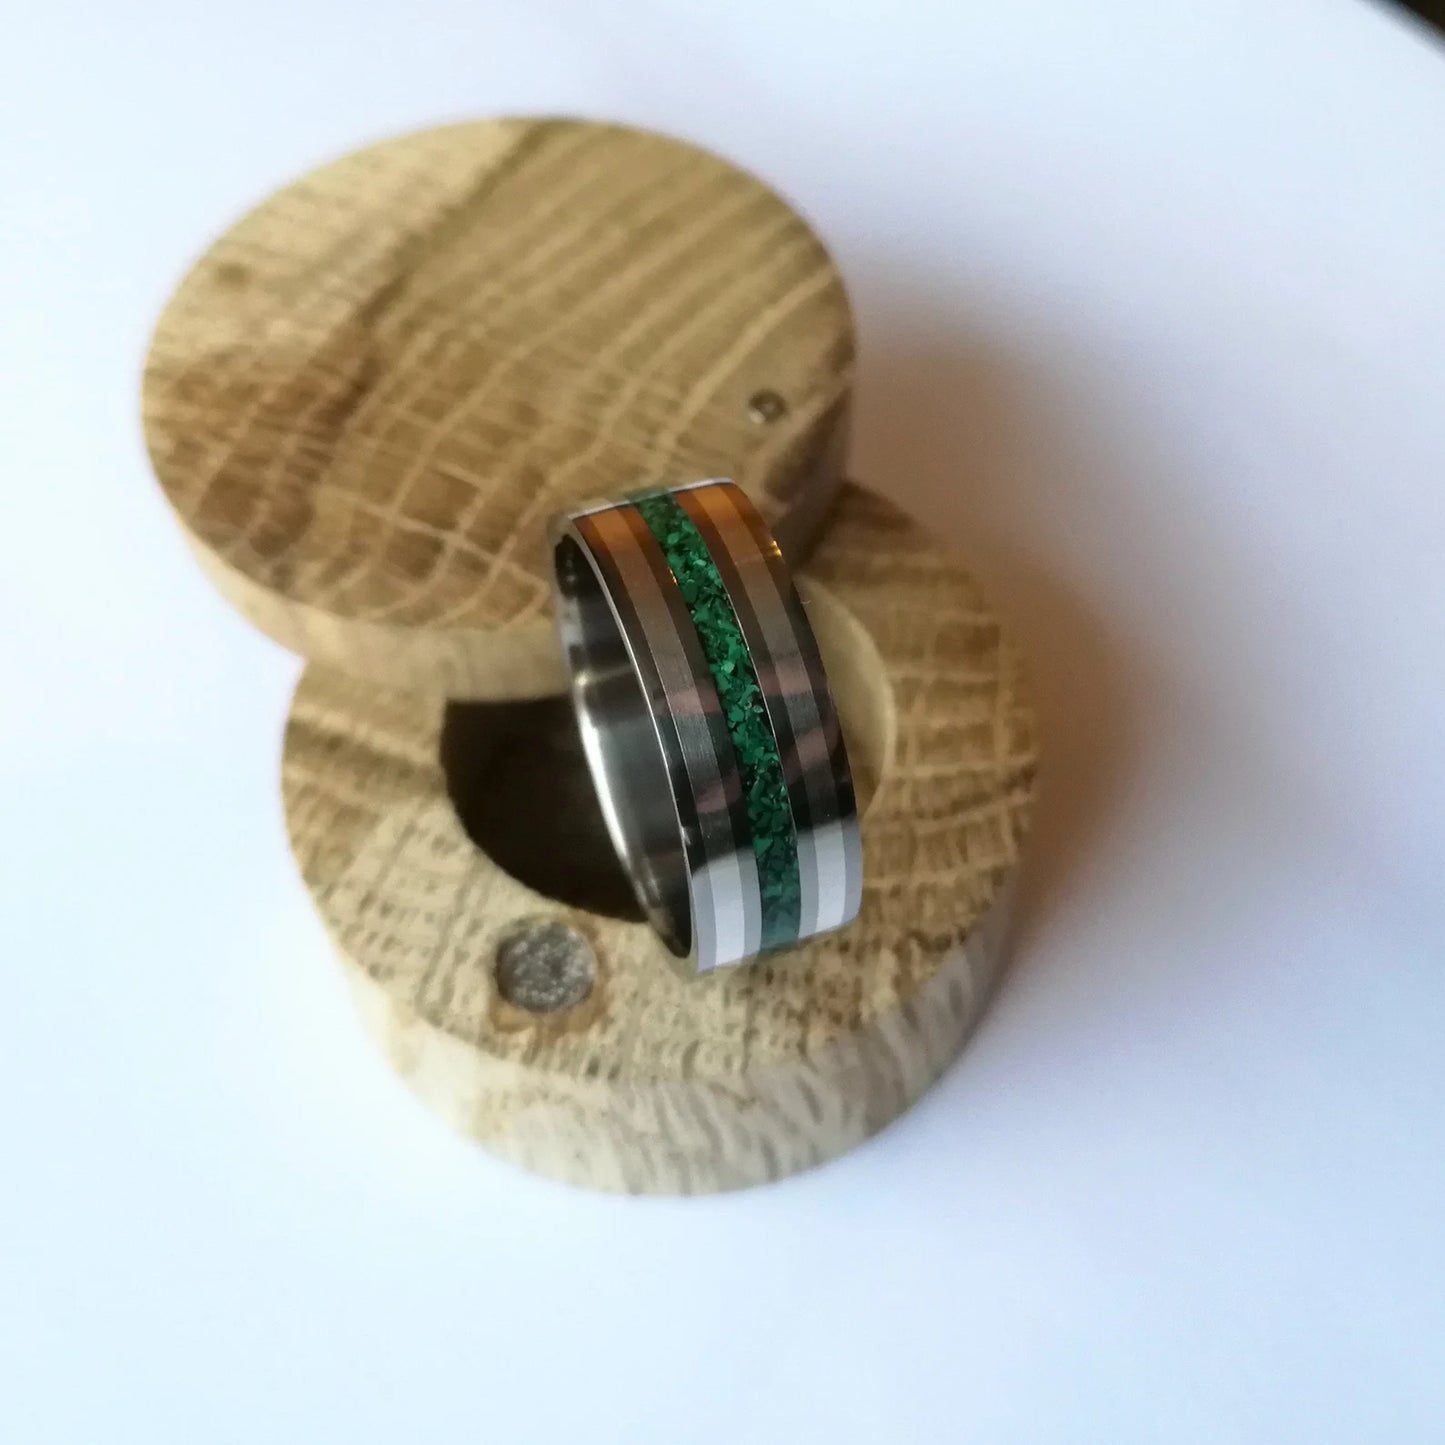 Unique Handmade Titanium Ring with Selected Outer Inlays and Center Malachite Inlay.